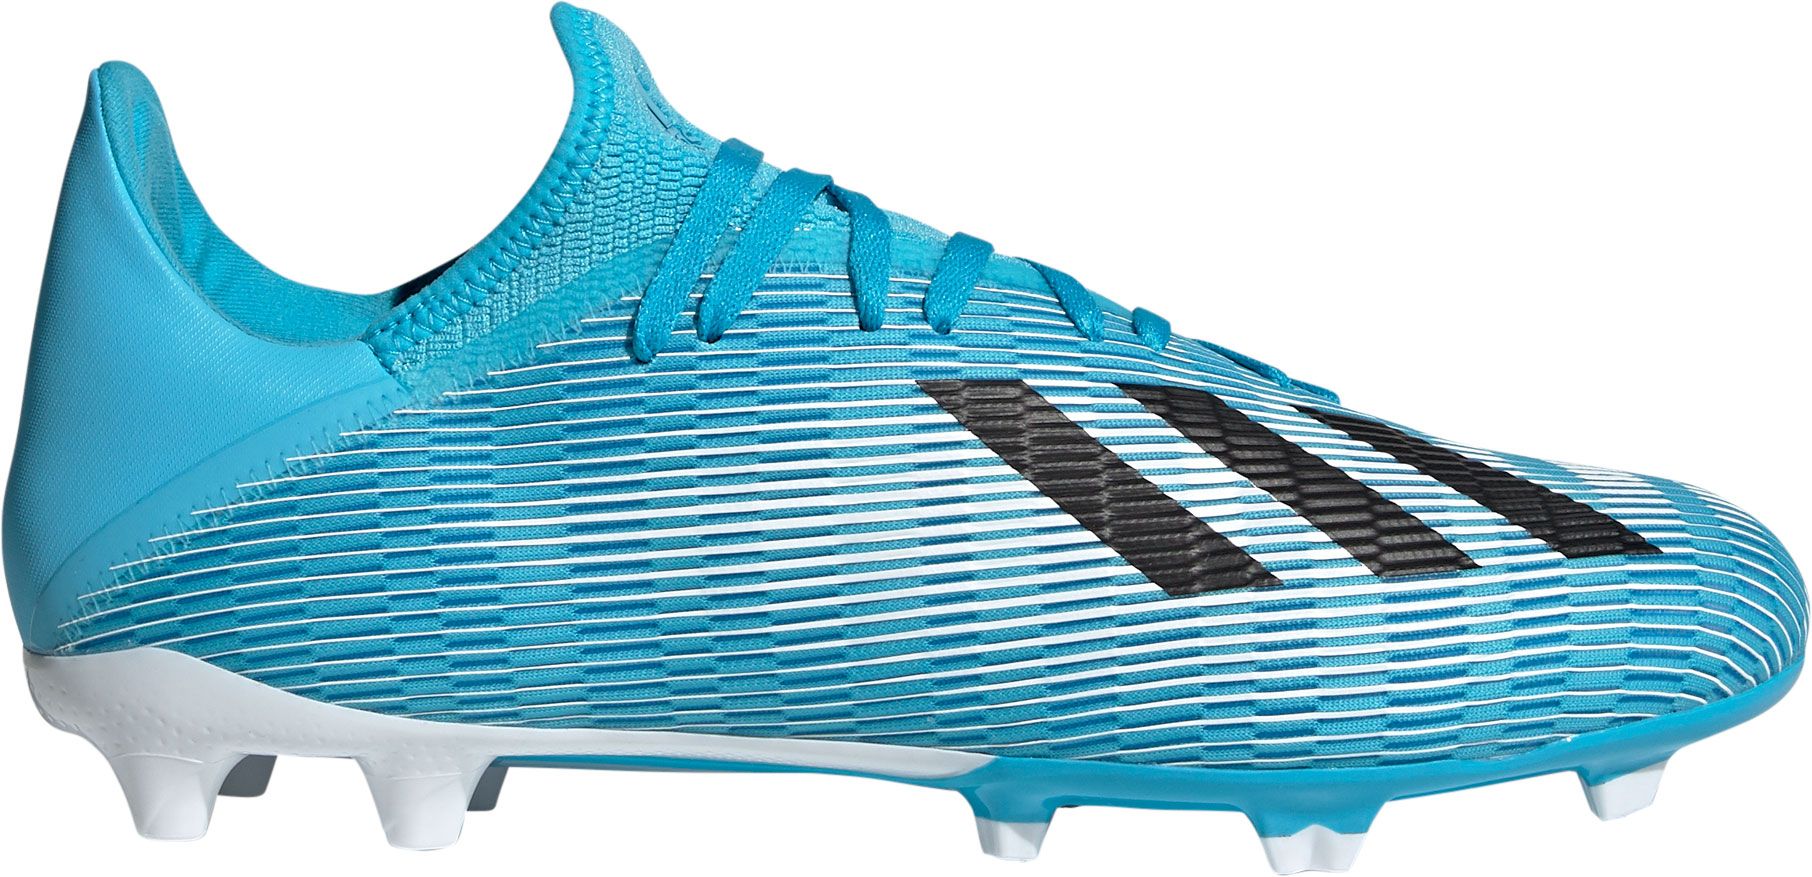 x soccer cleats